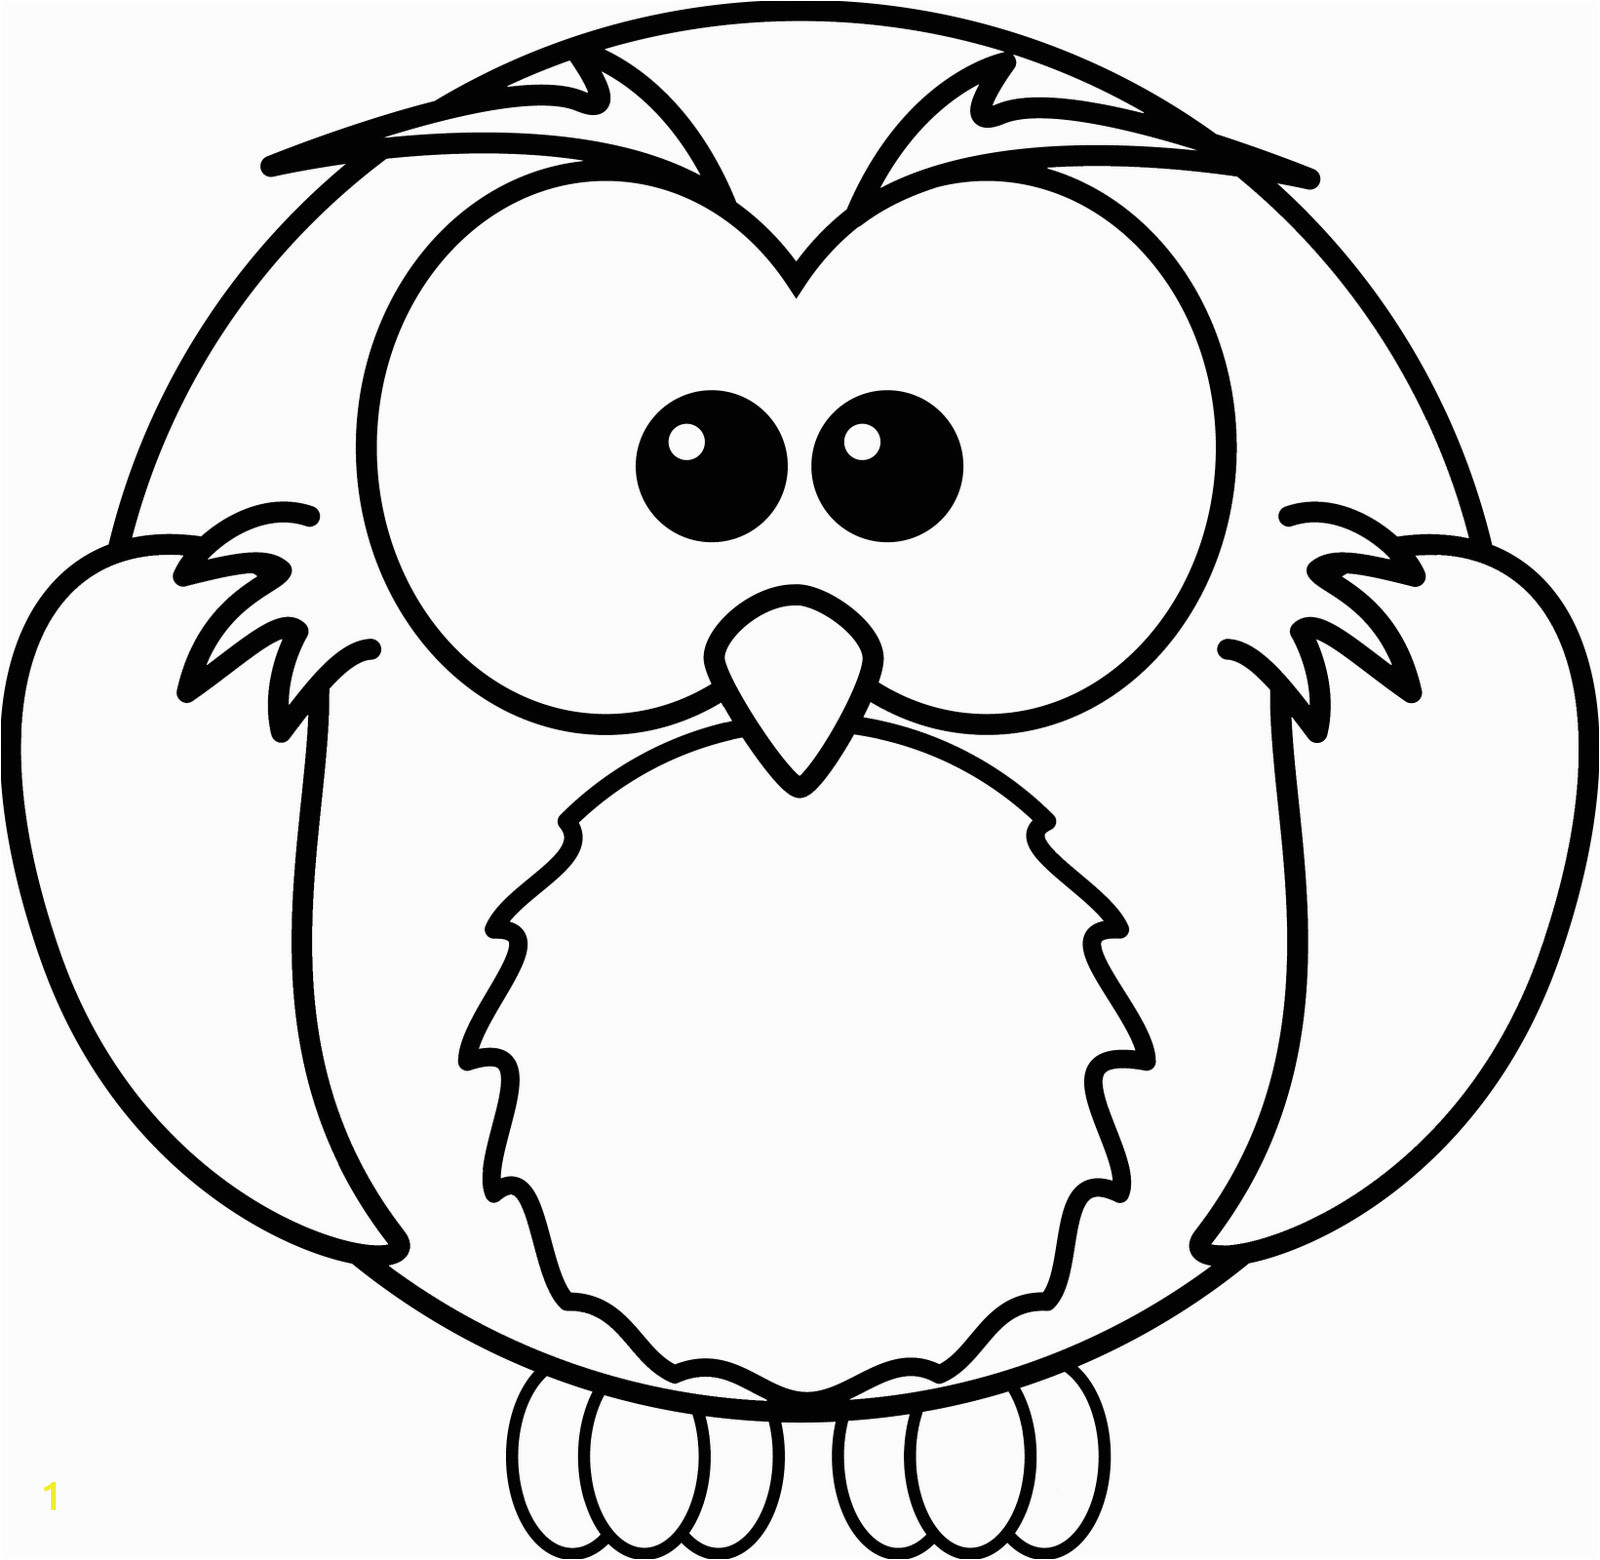 Free Owl Coloring Pages to Print Baby Owls Coloring Sheet to Print